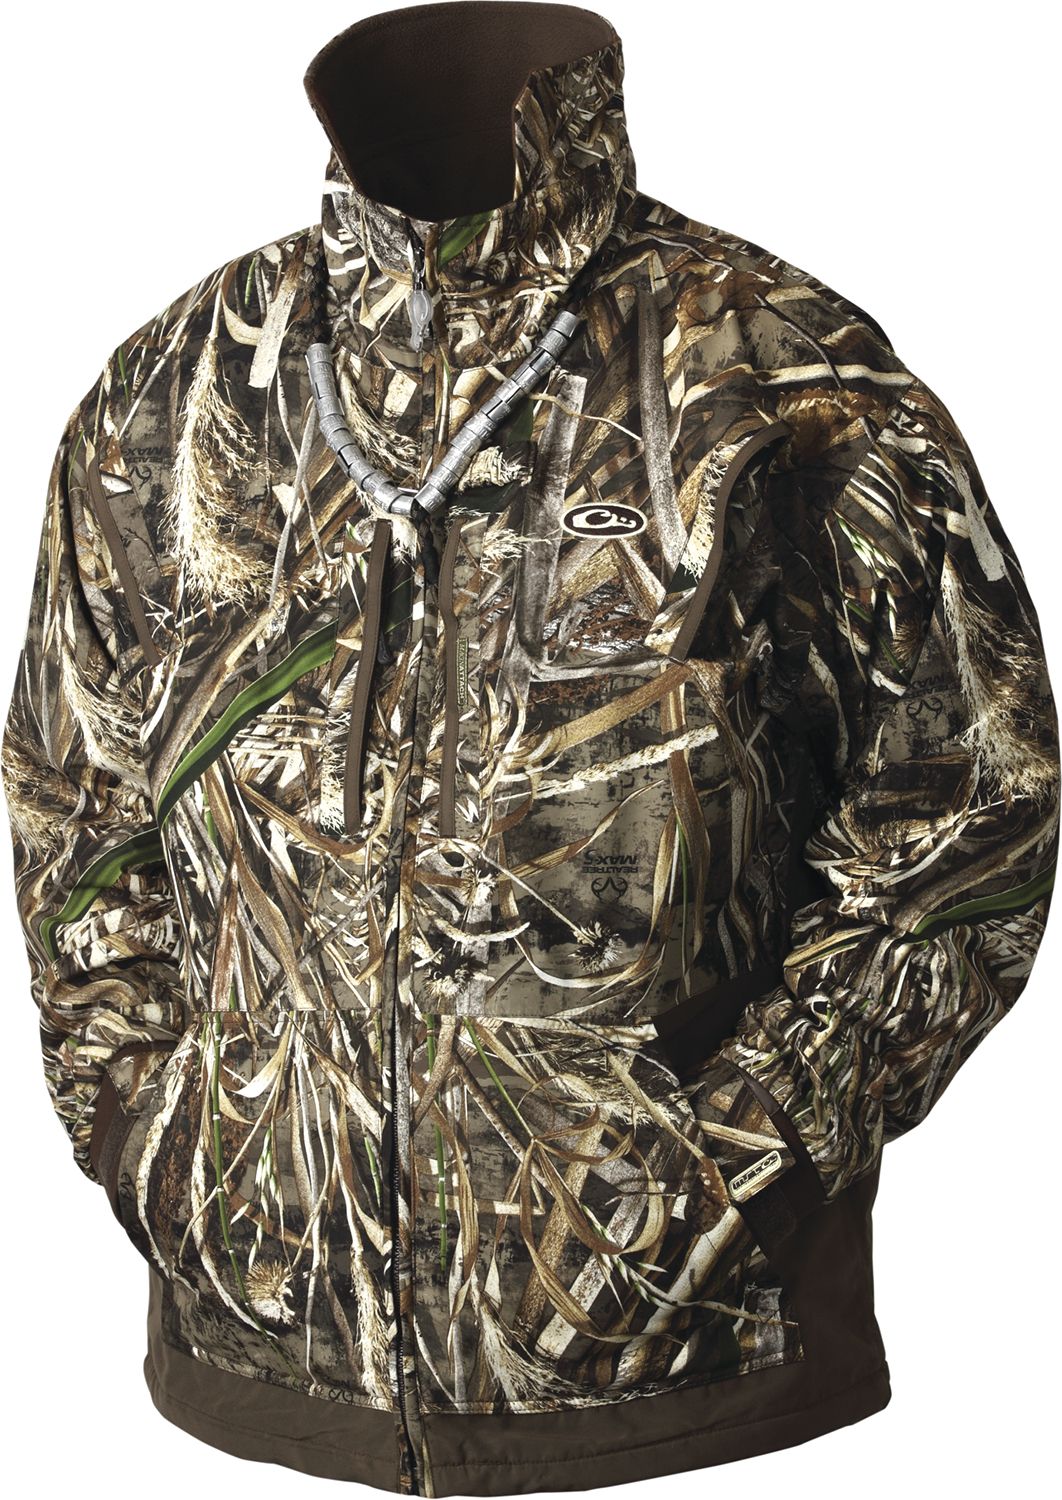 Men's Big and Tall Hunting Clothes | Best Price Guarantee at DICK'S